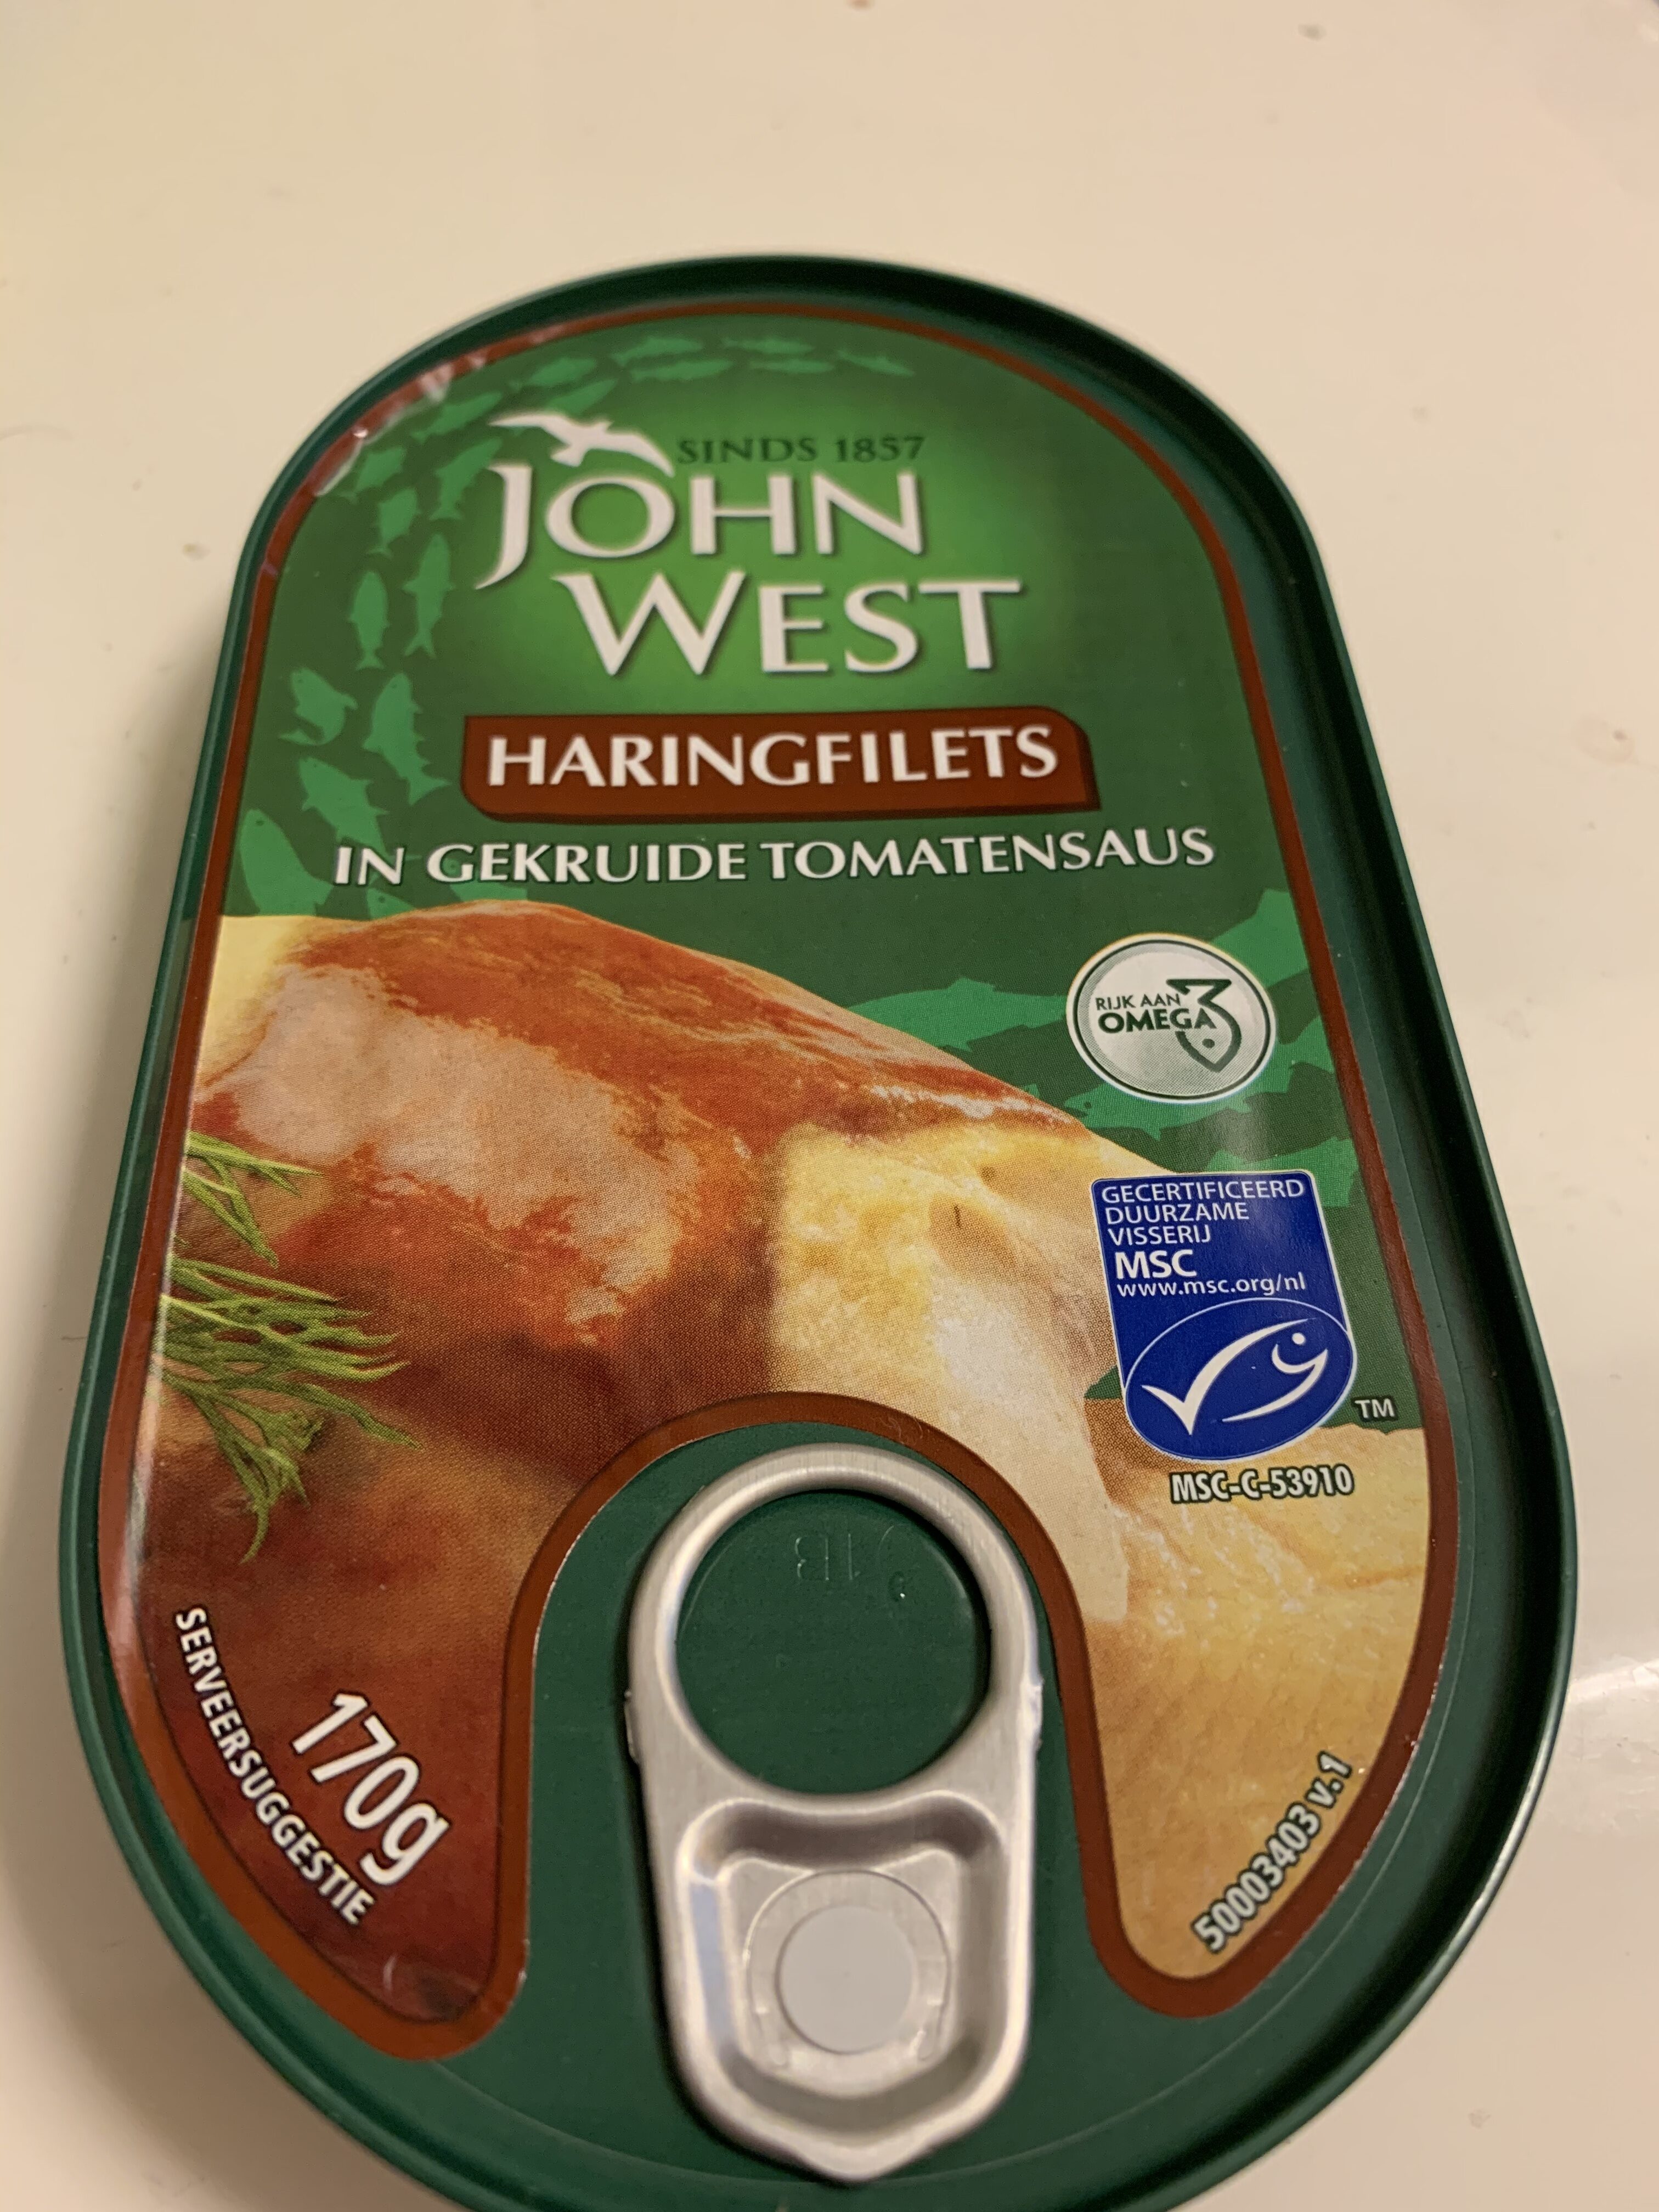 Haringfilets in gekruide tomatensaus - Product